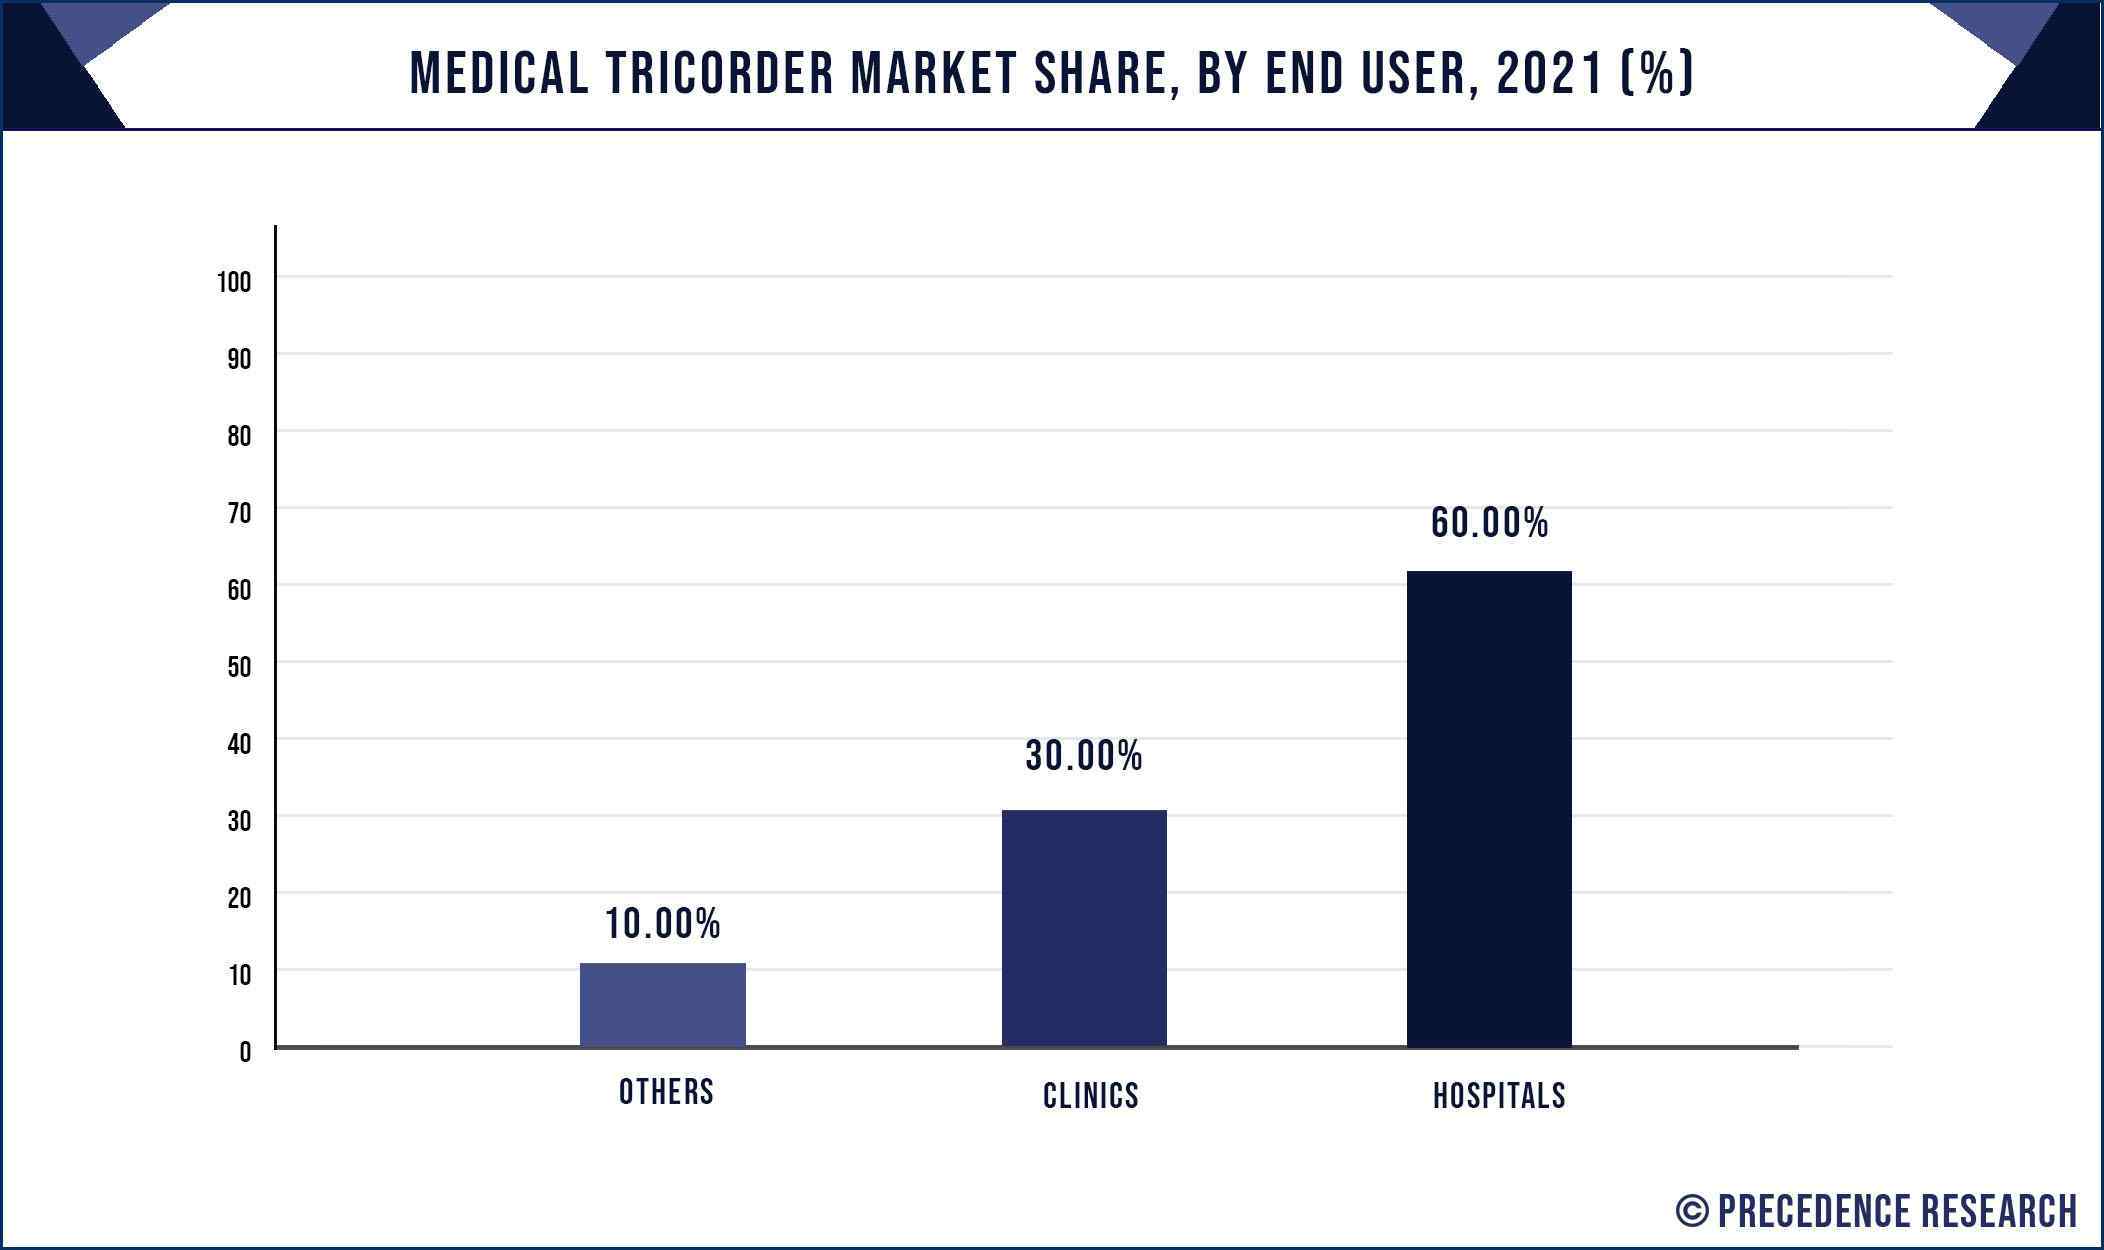 Medical Tricorder Market Share, By End User, 2021 (%)